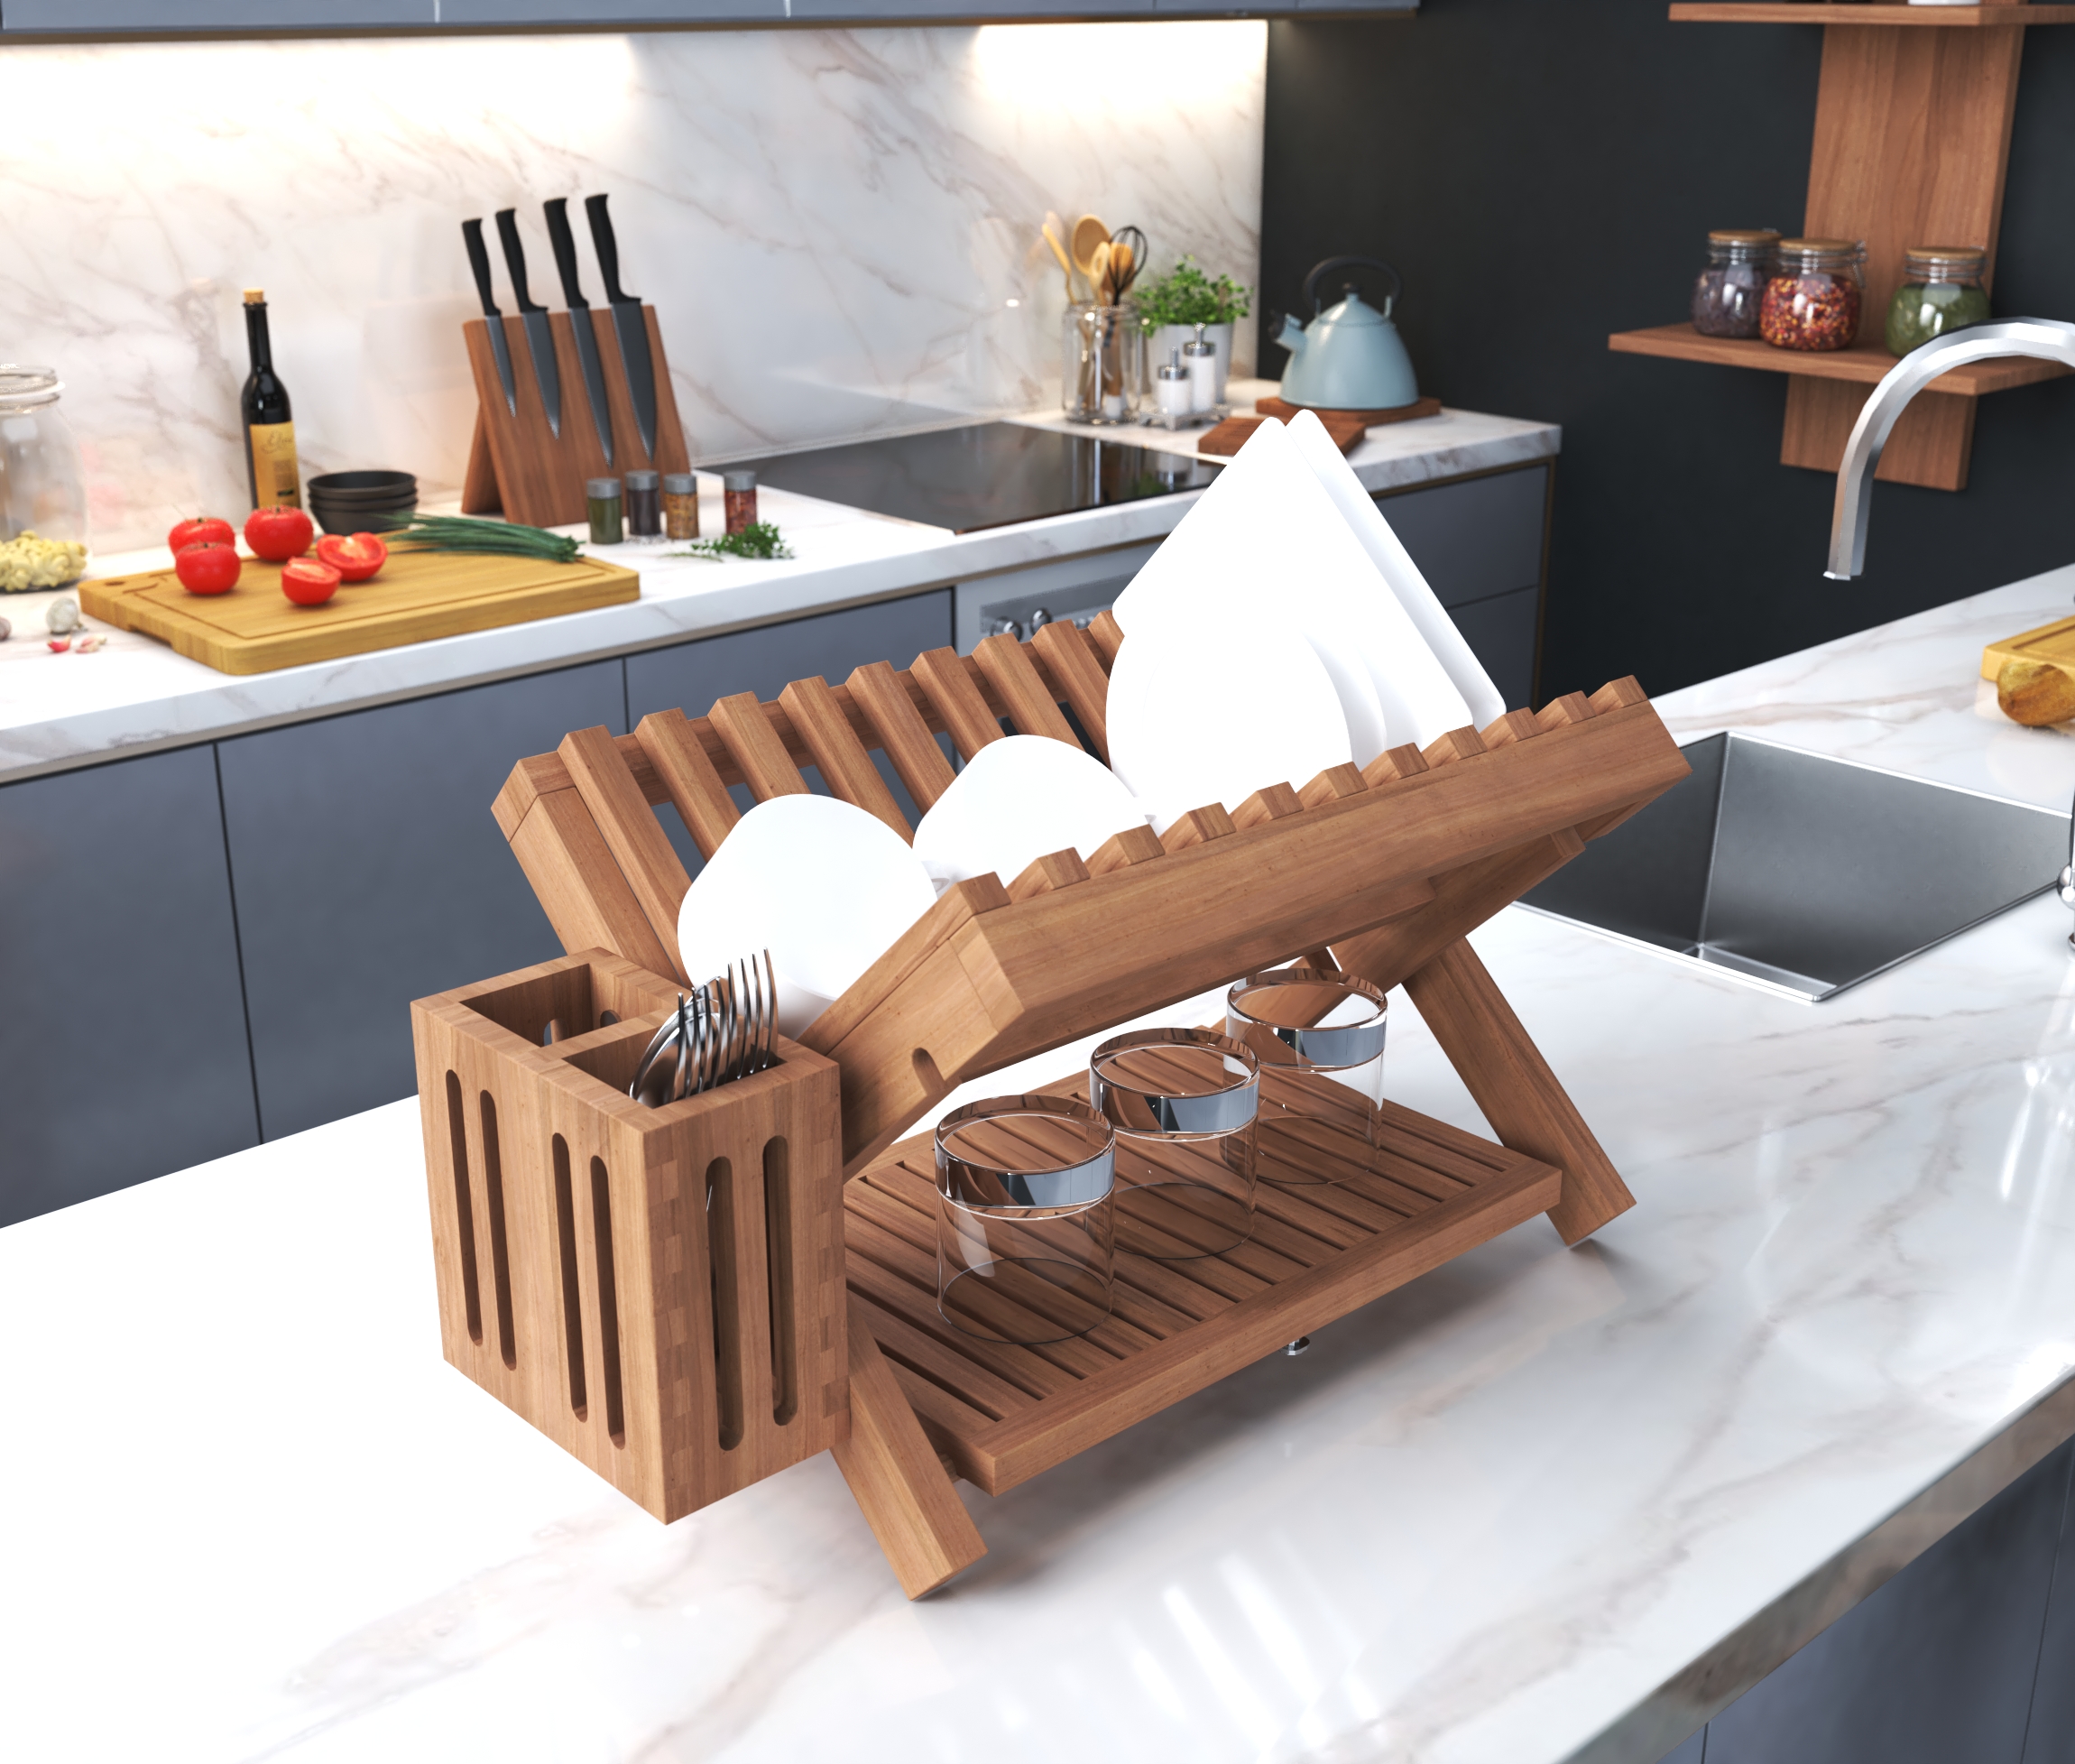 Dish Rack and Vegetable Drying Rack for Sink in Your Kitchen, Made of Teak  Wood